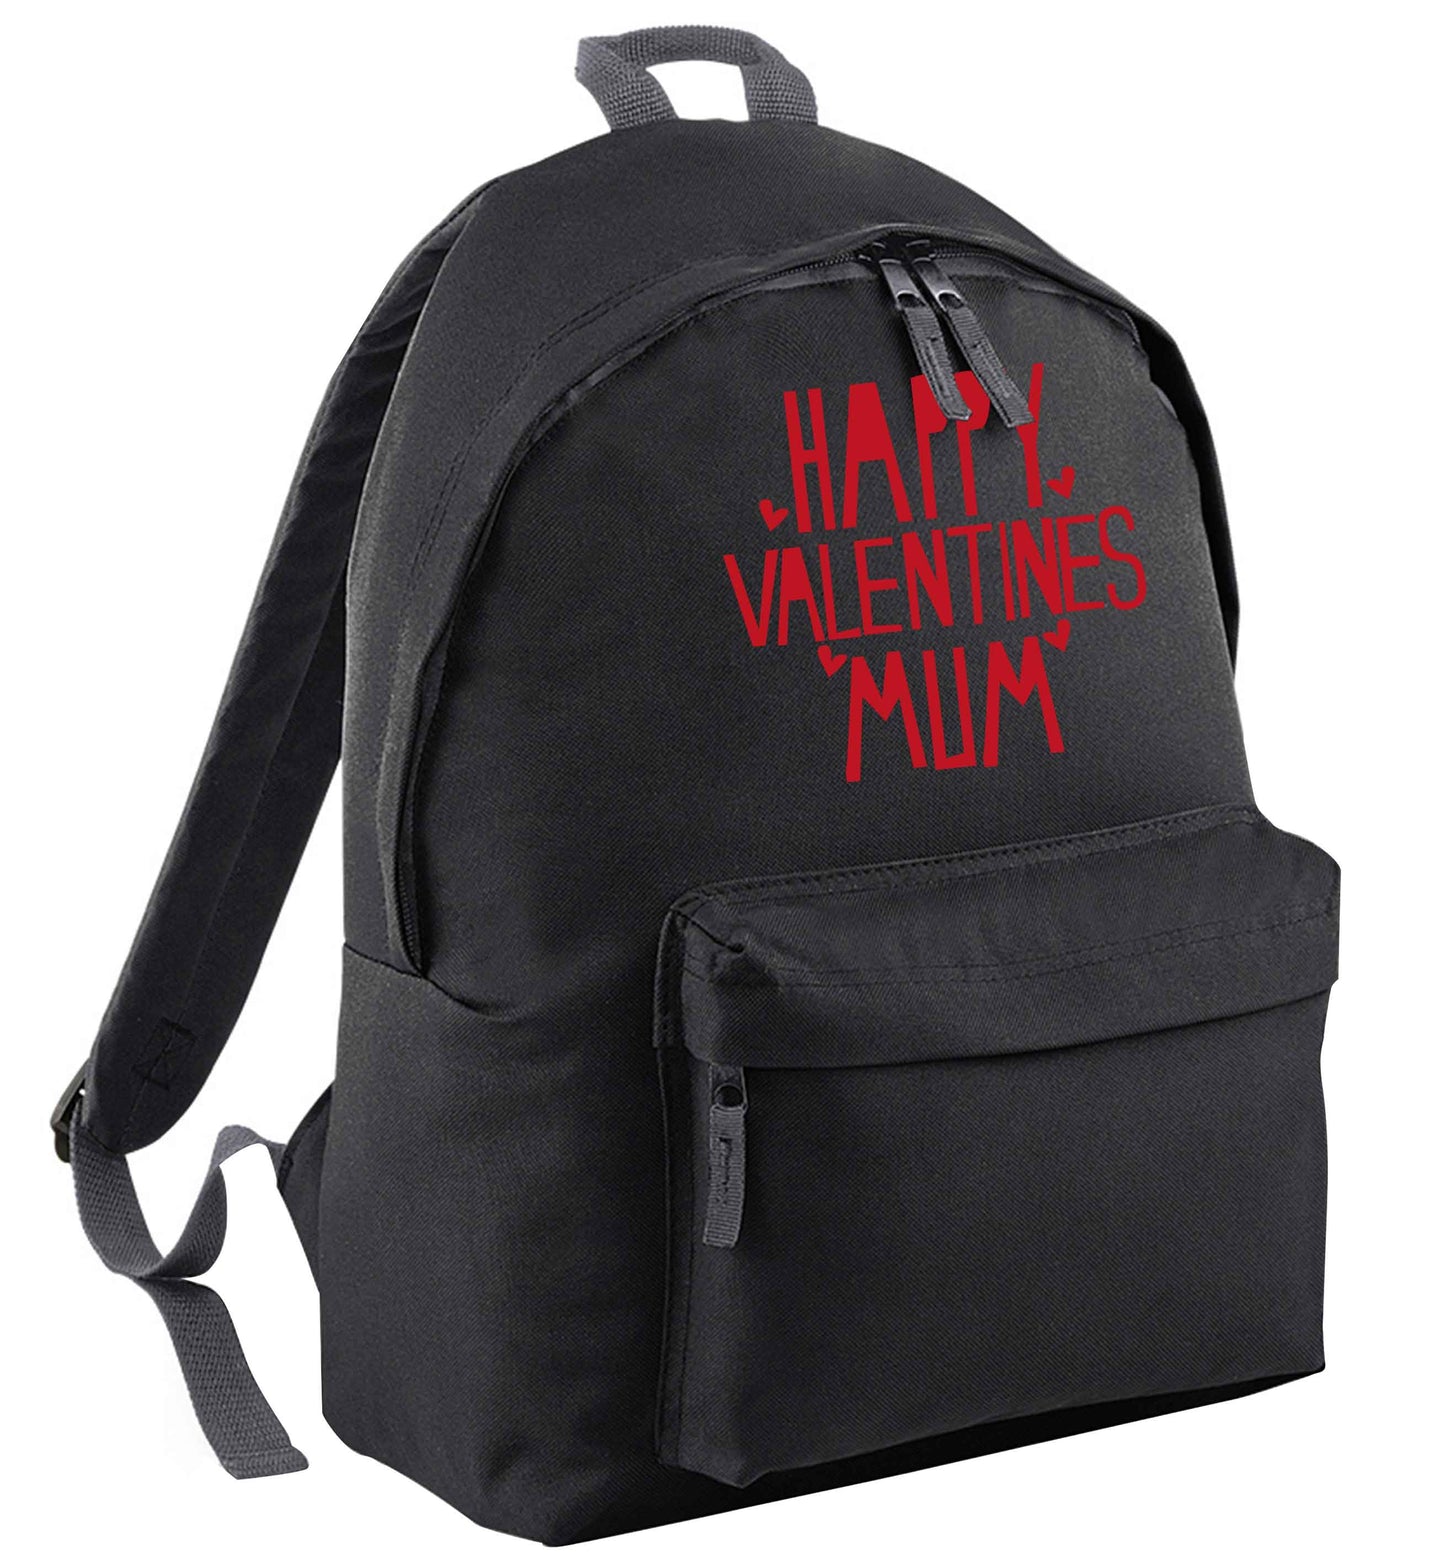 Happy valentines mum | Adults backpack